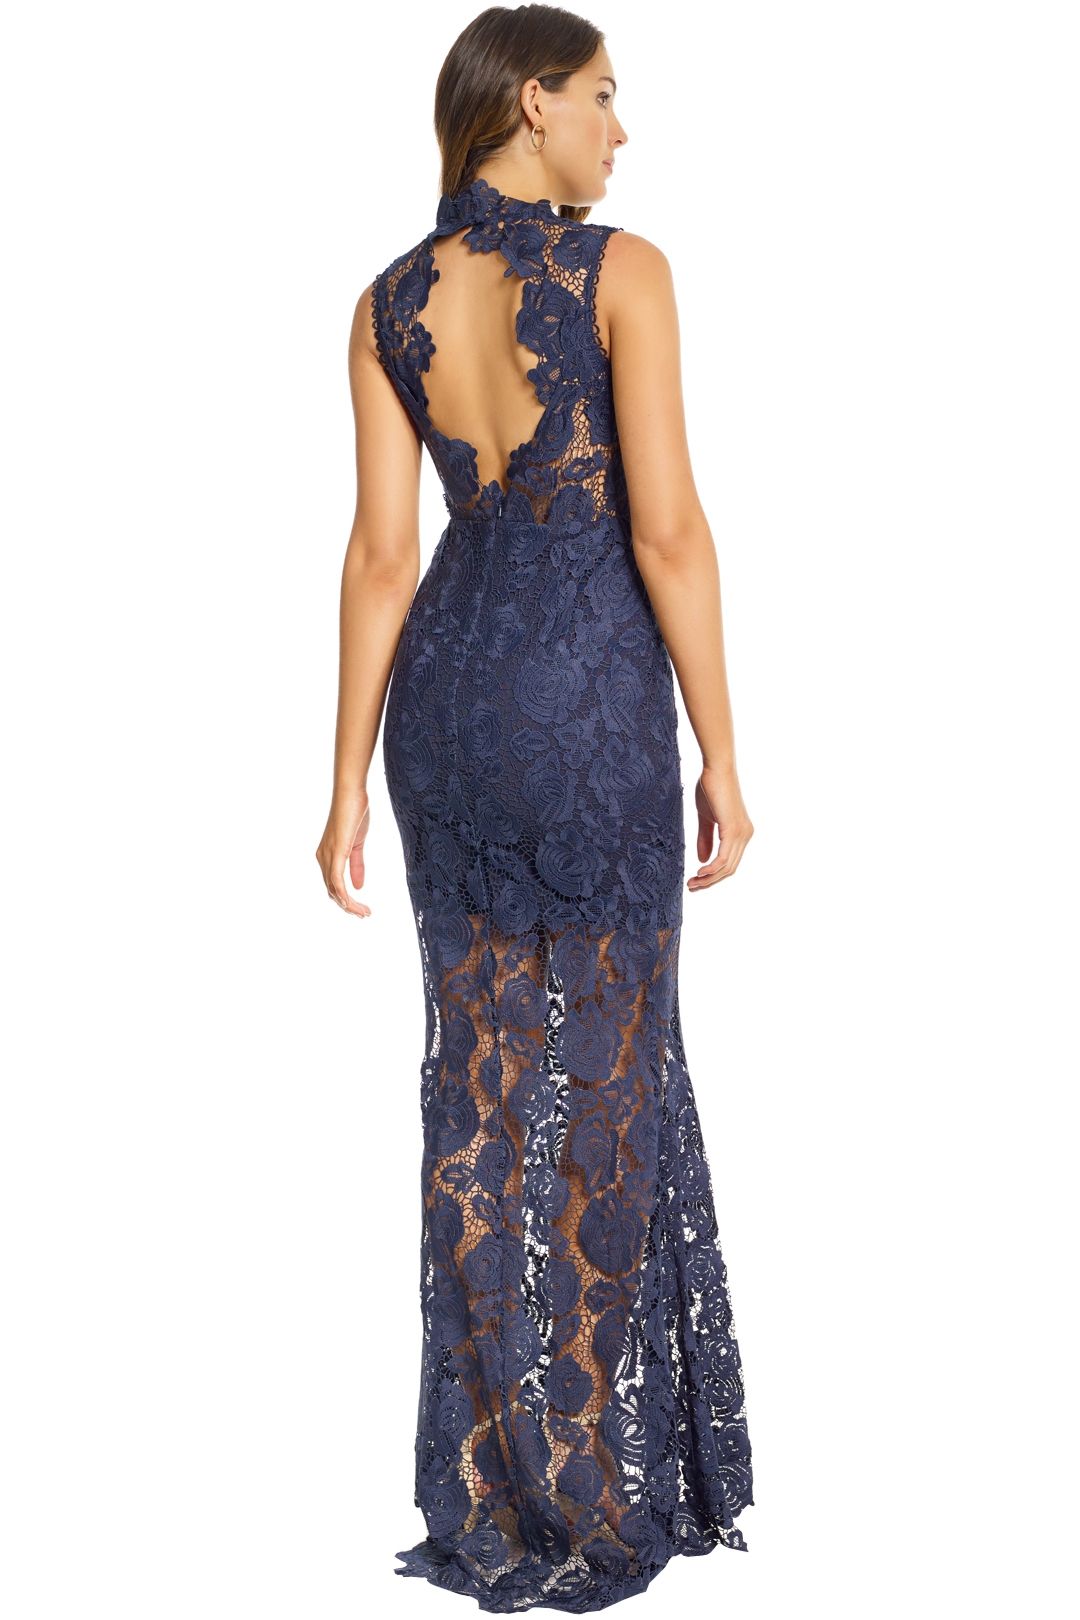 Grace and Hart - Espresso Gown - Navy - Back